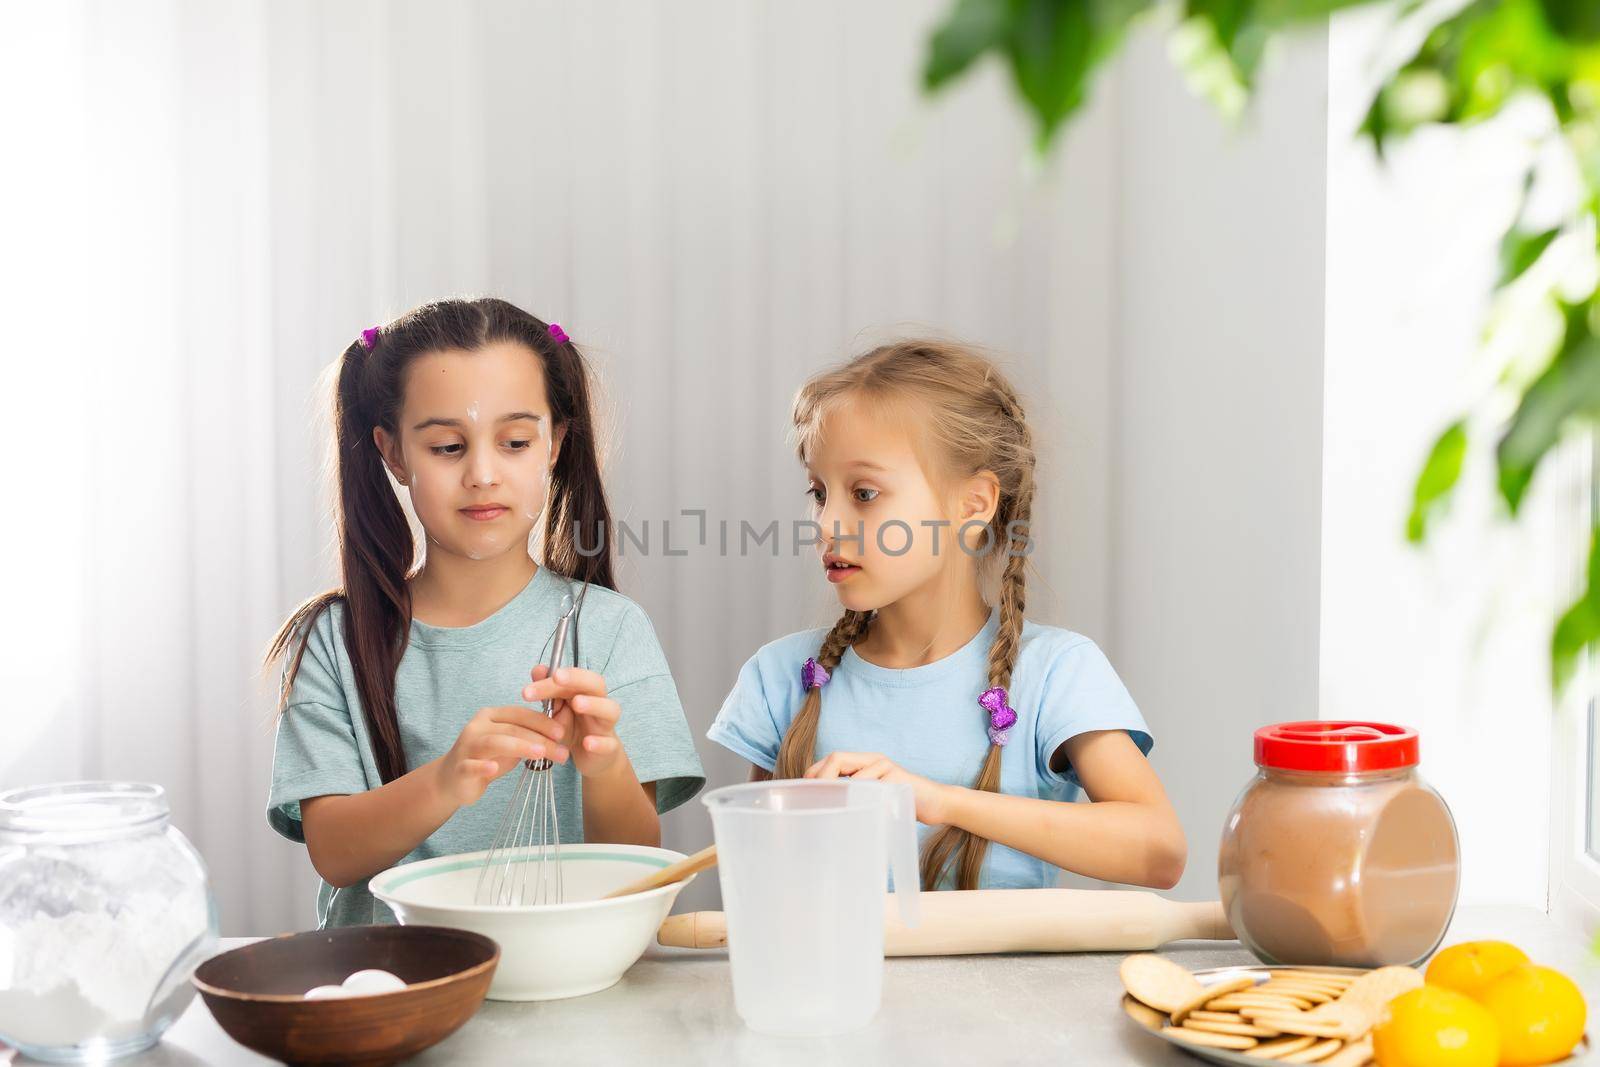 Two little girls in the kitchen prepare food, a dessert for the family. As they learn to cook they start playing with flour and smiling each other. Concept of: cooking classes, family, education.